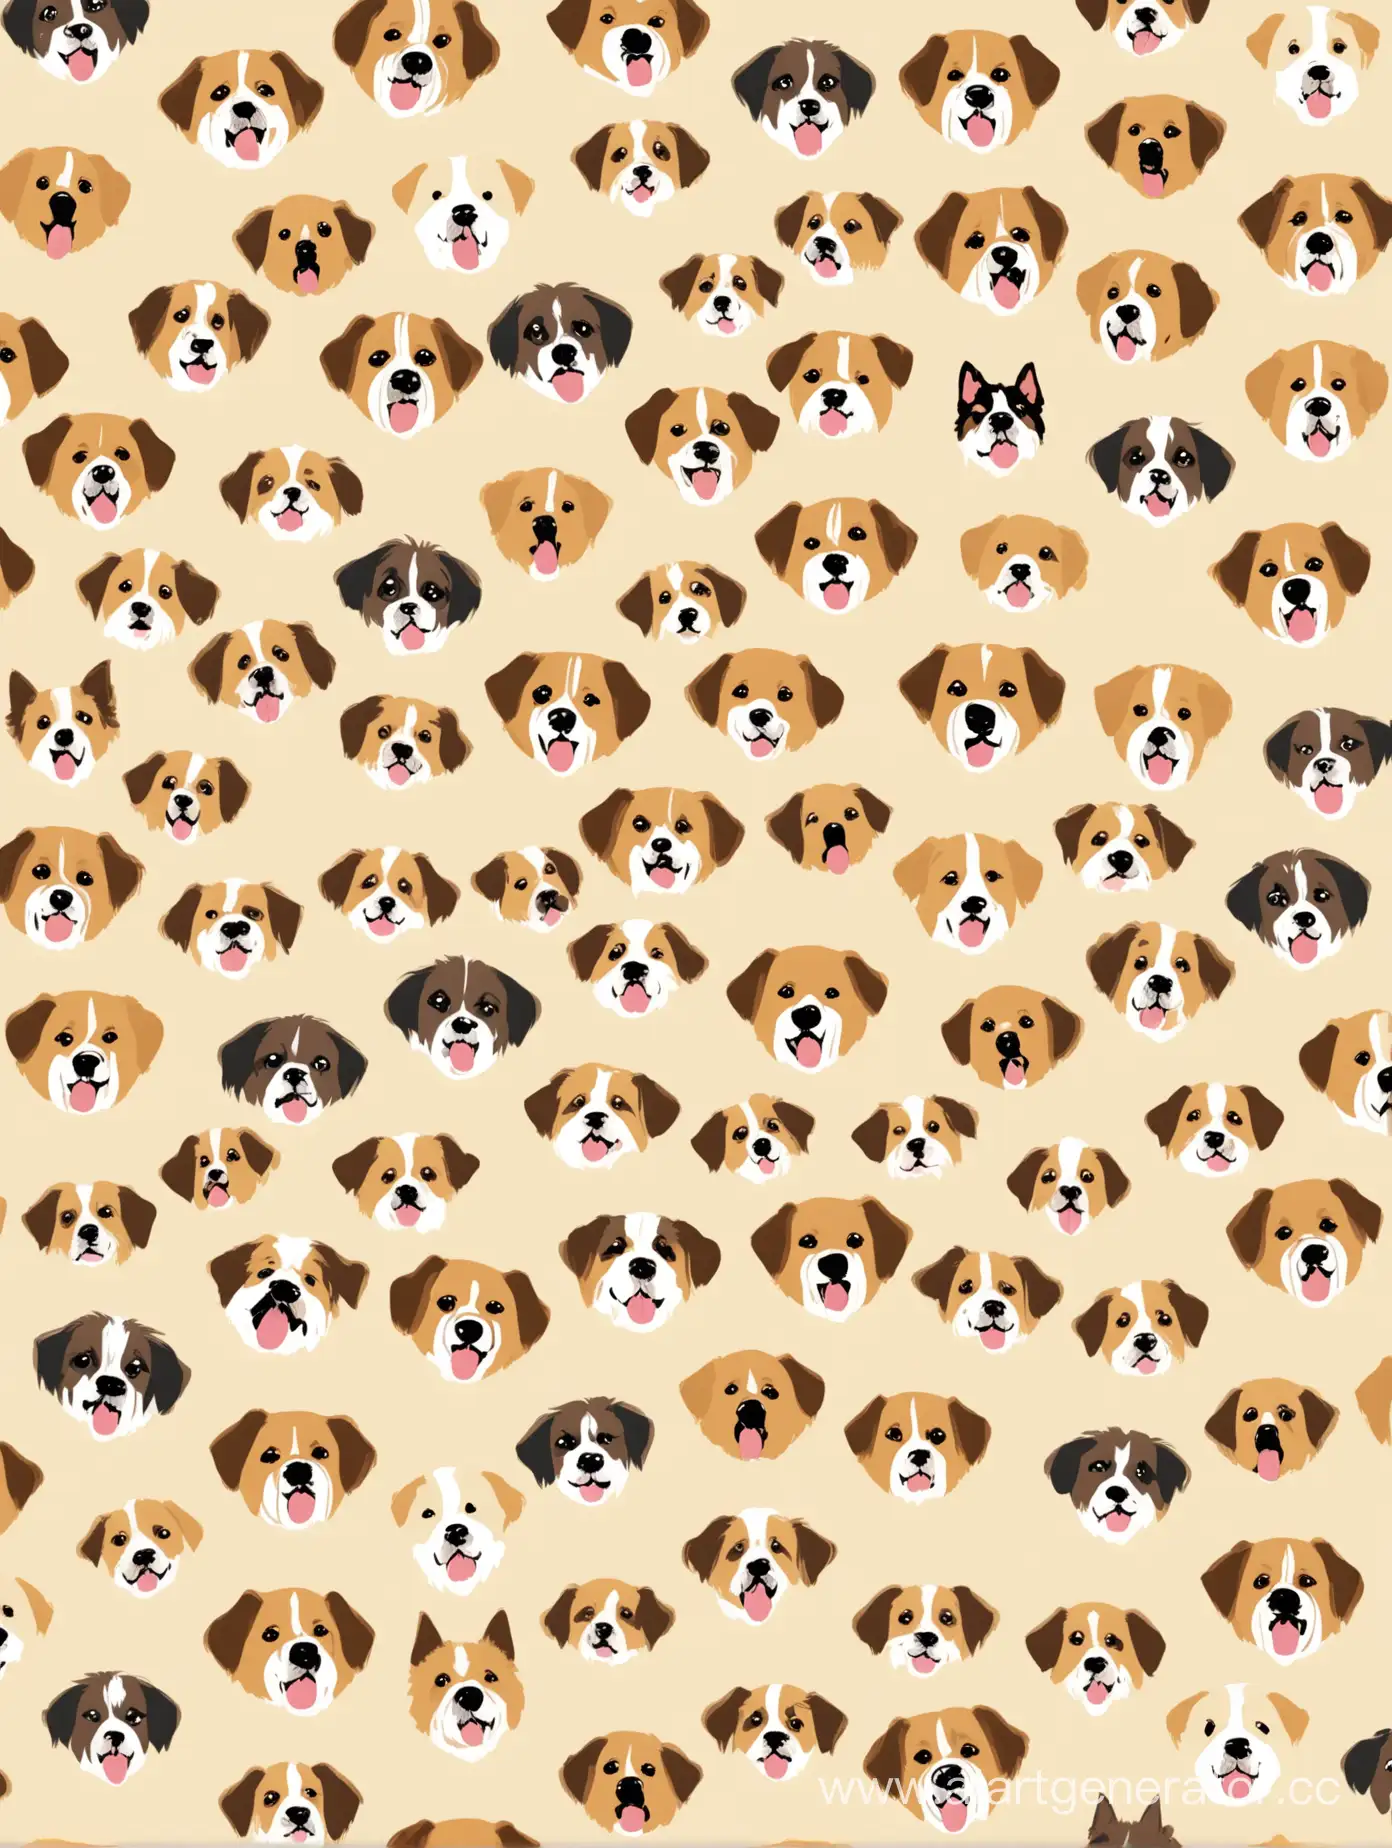 Collection-of-Dog-Faces-on-Beige-Background